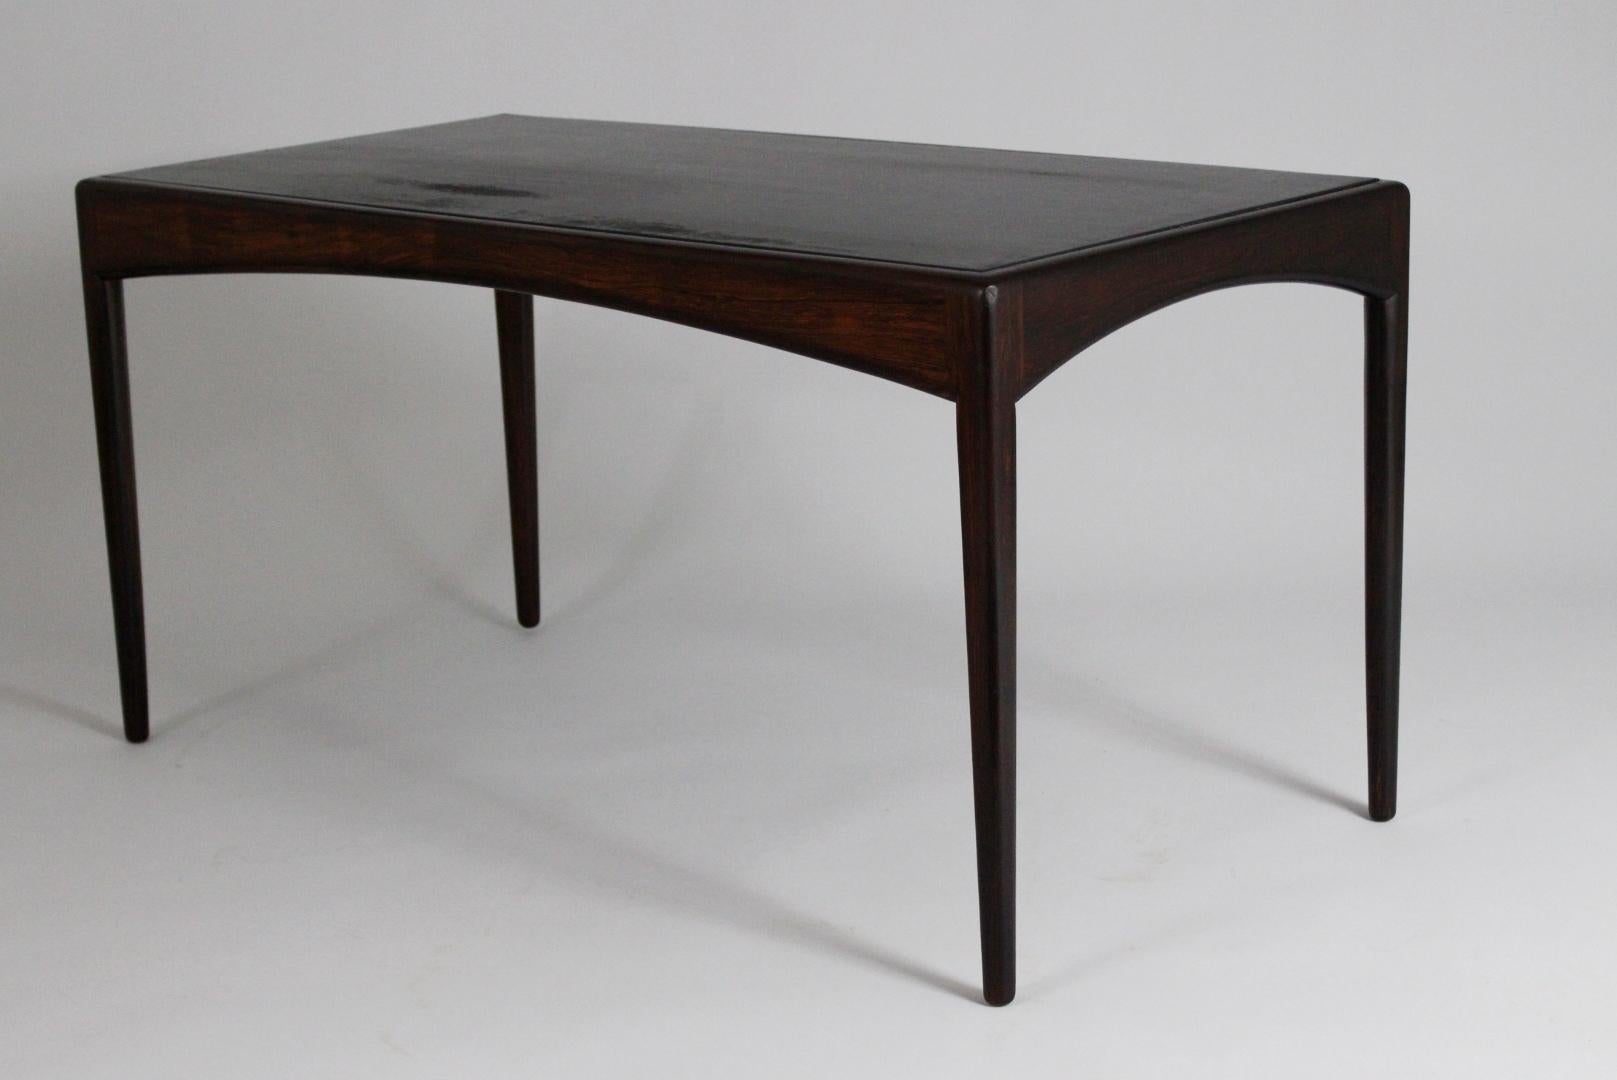 Scandinavian Modern Danish Coffee Table with Leather Top by Kristian Vedel for Søren Willadsen 1960s For Sale